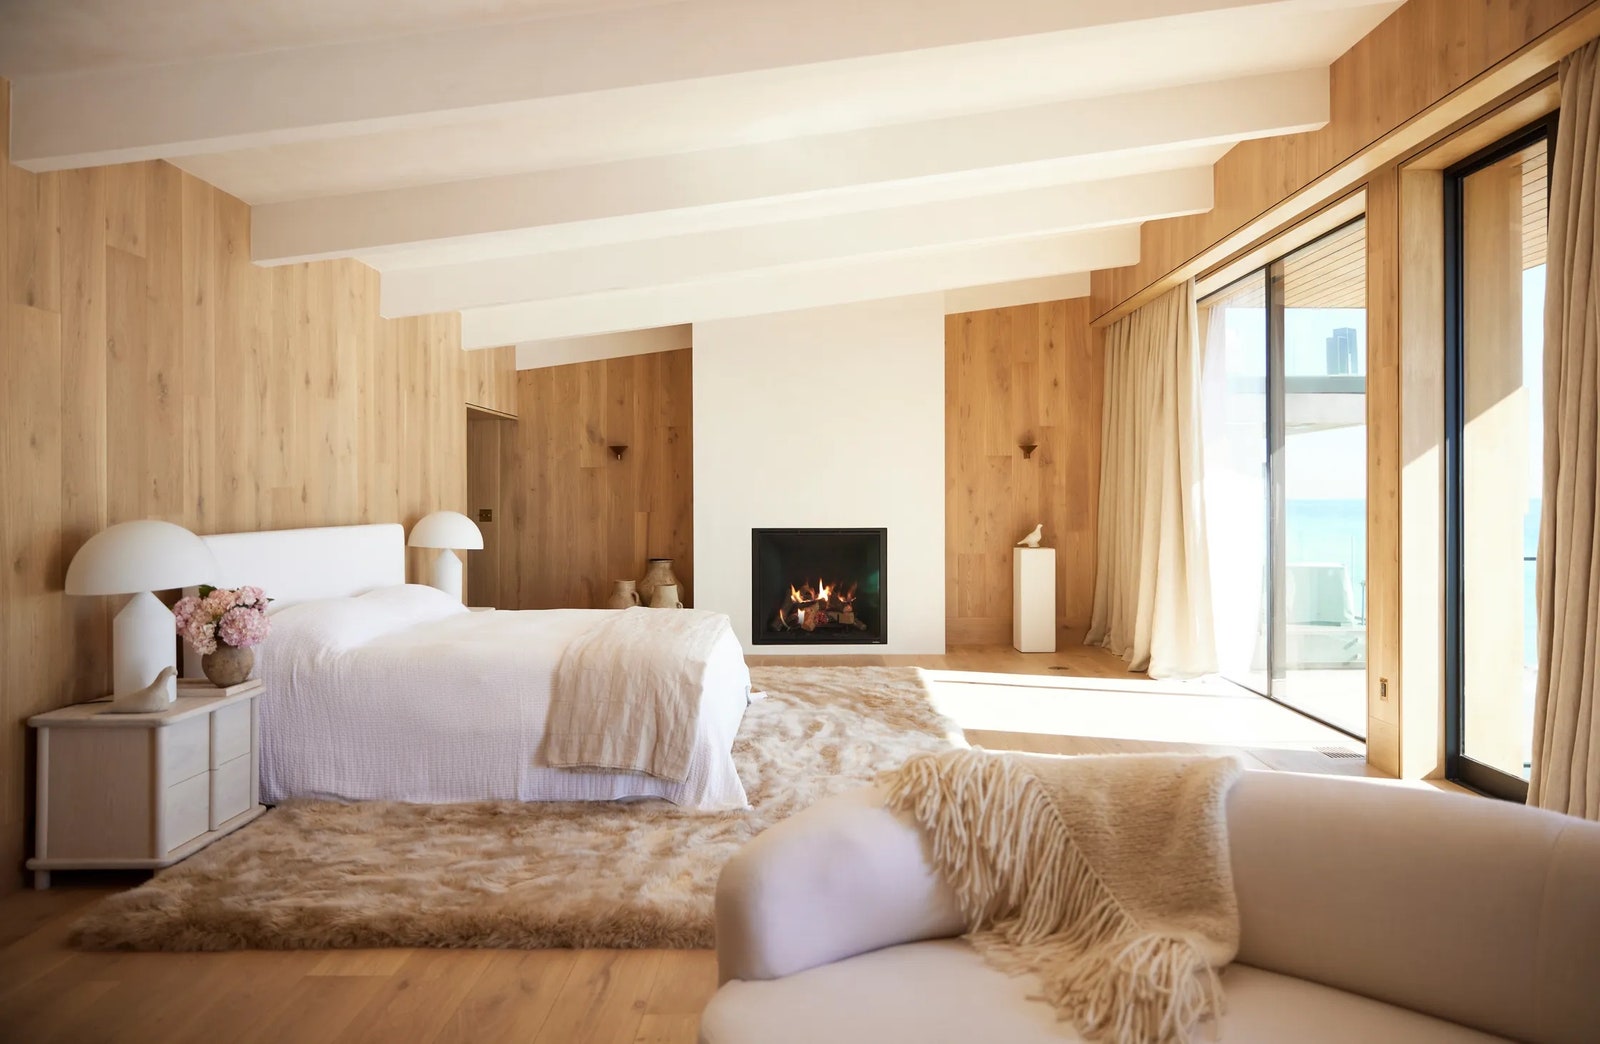 The primary bedroom at Saffron Case Homess Carbon Beach project in Malibu is lined with warm wood paneling and...